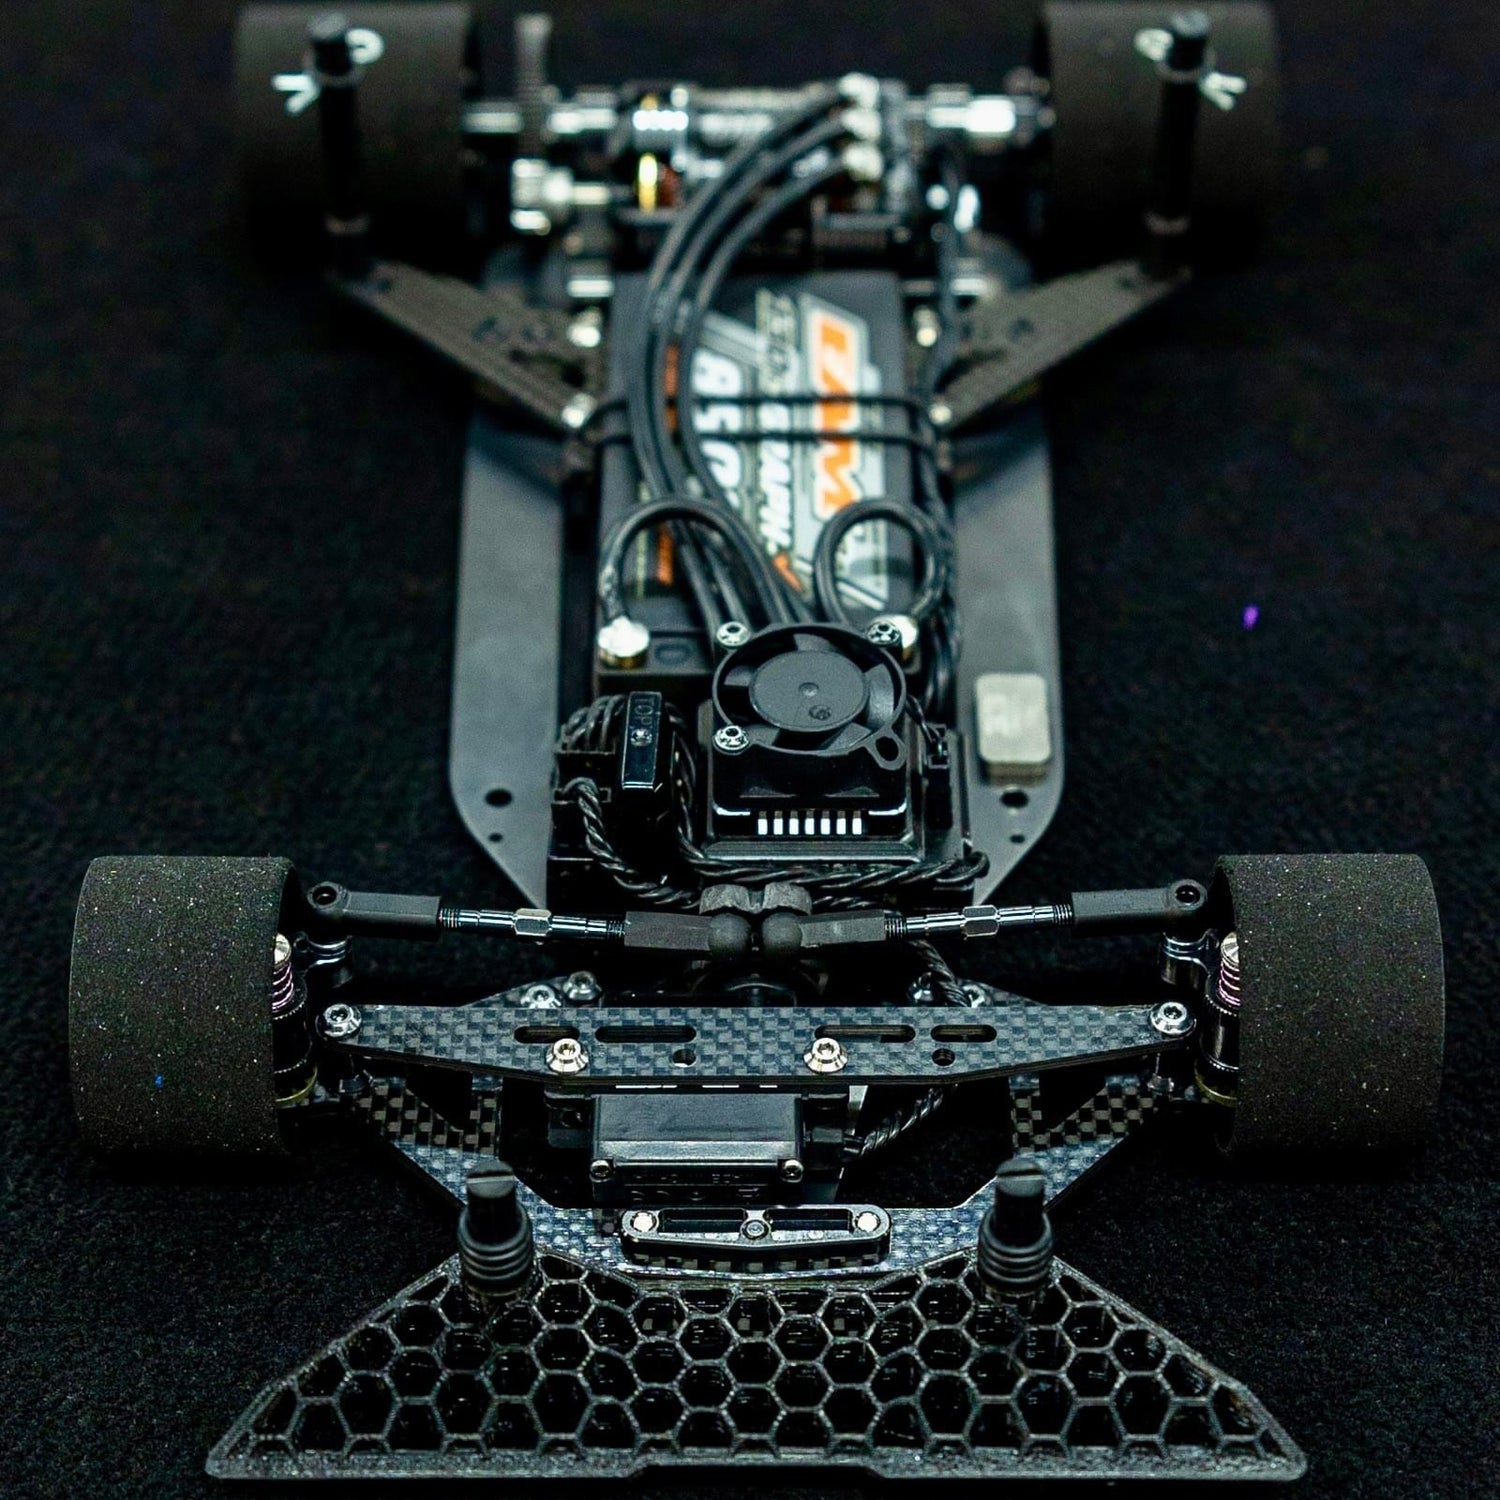 Kemp Anderson’s Round 1 TQ 1up Equipped Awesomatix A12